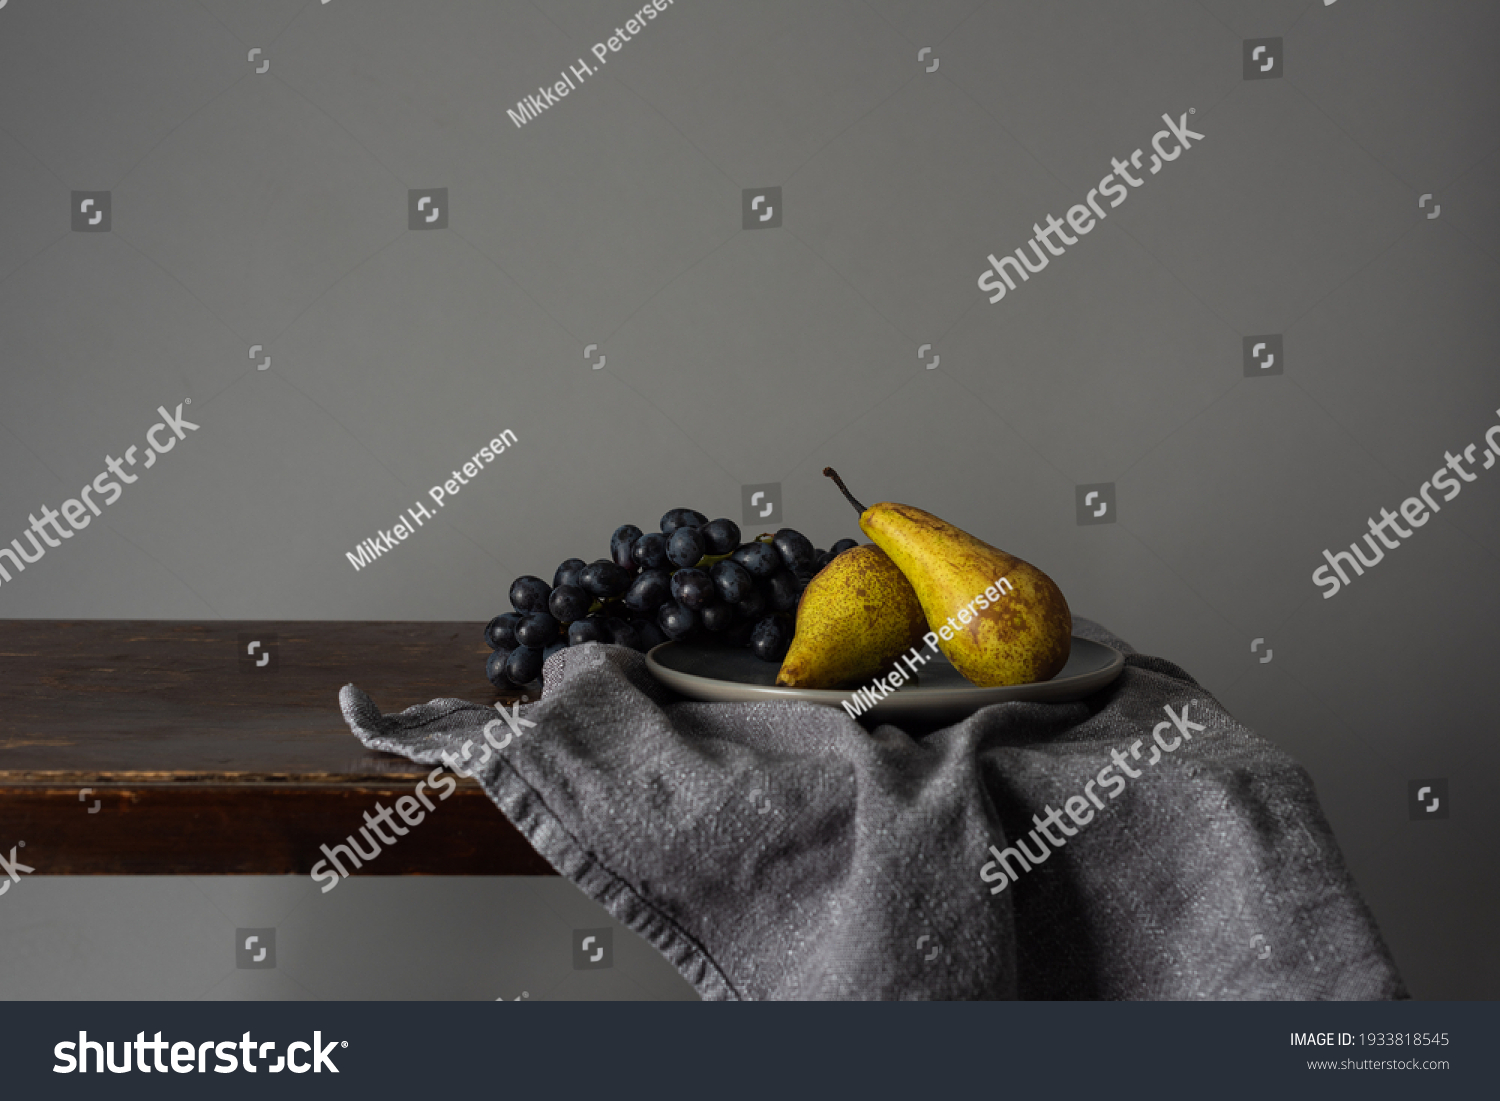 Still life with fruits. Grapes and pears on a rustic table indoors with a moody window light #1933818545